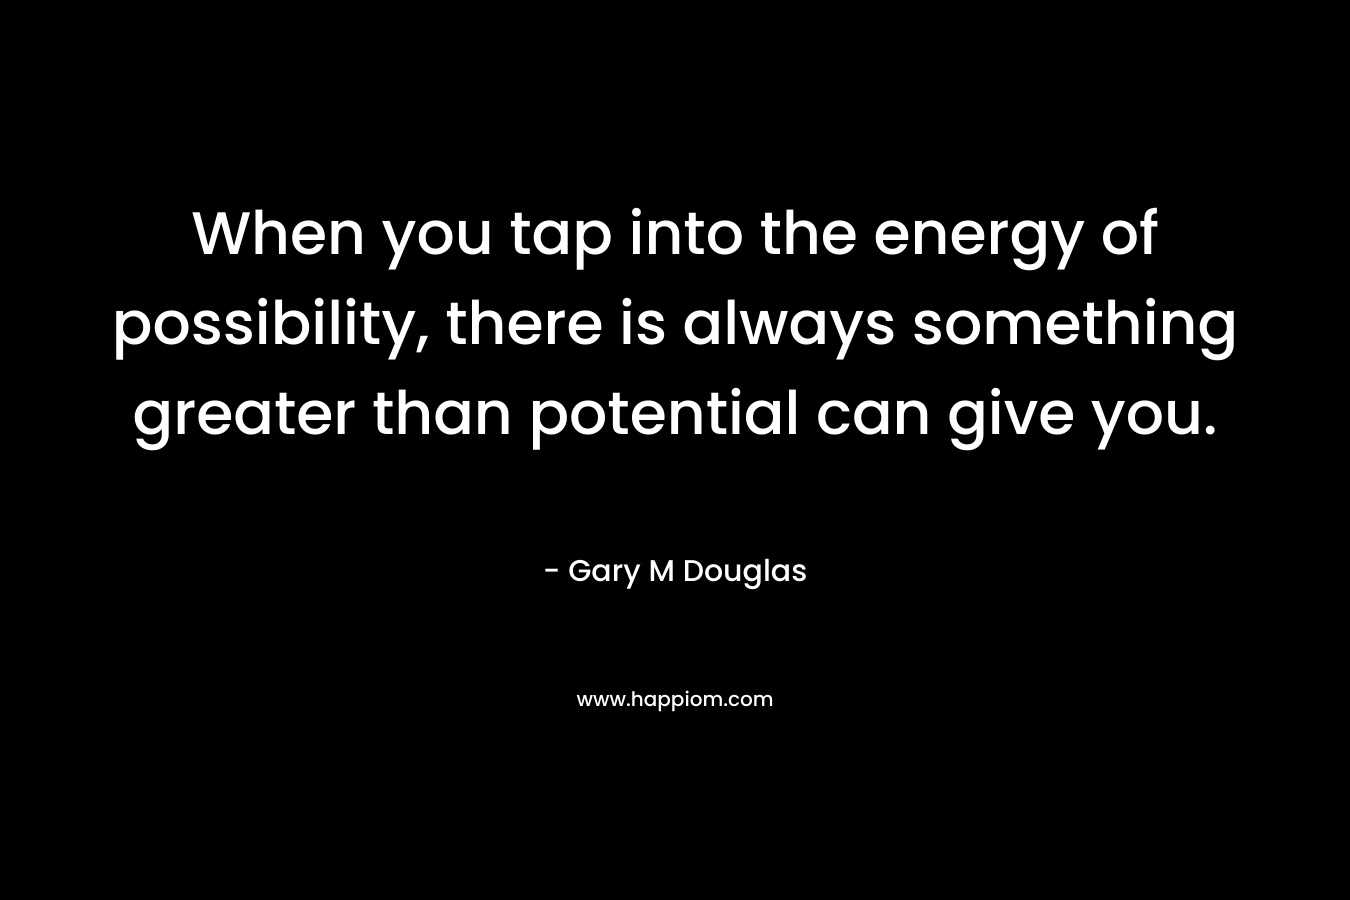 When you tap into the energy of possibility, there is always something greater than potential can give you. – Gary M Douglas